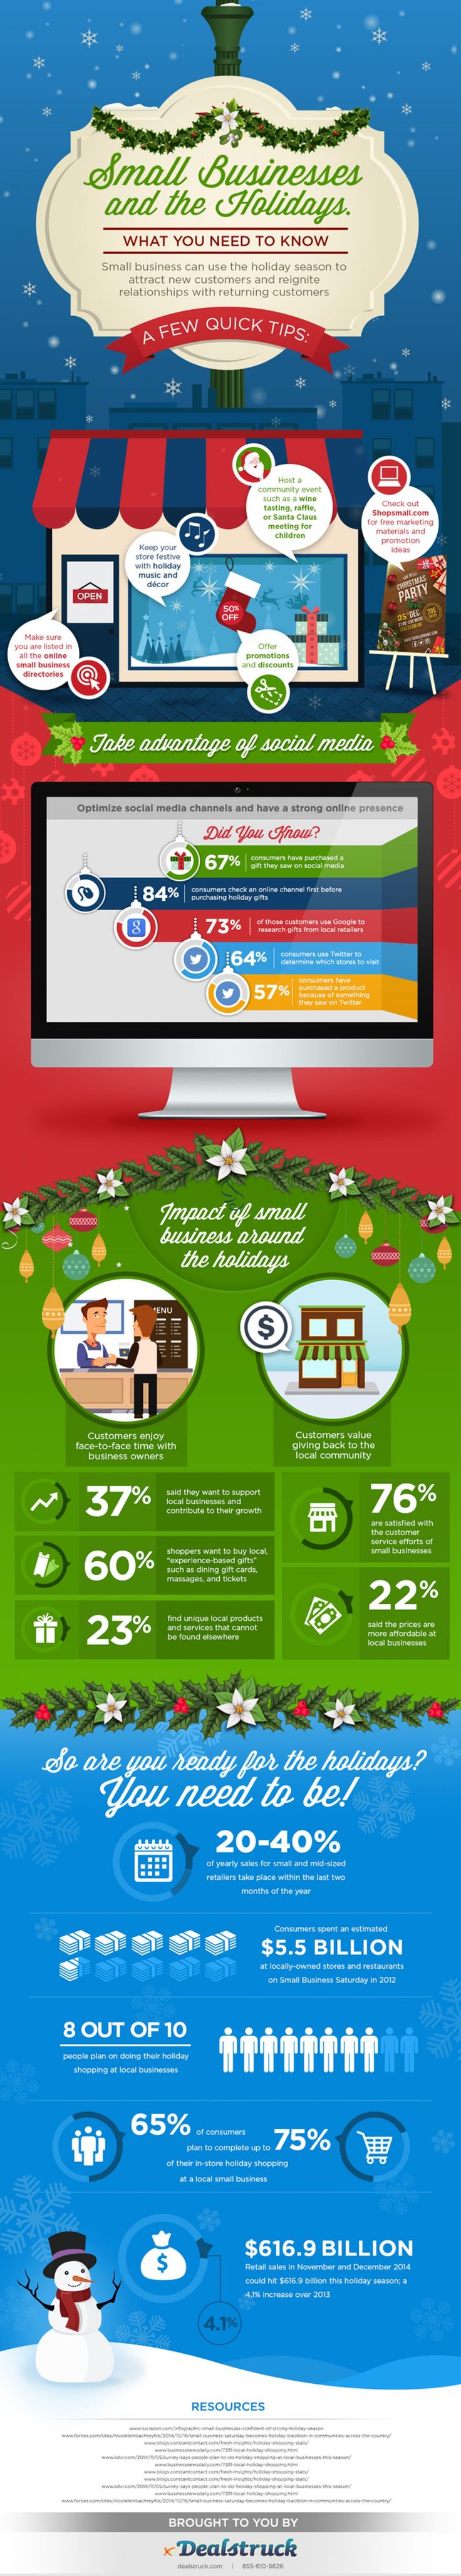 Digital-Marketing-SmallBusiness-and-the-Holidays-What-You-Need-to-Know-via-007-Marketing Digital Marketing : #SmallBusiness and the Holidays: What You Need to Know  via 007 Marketing